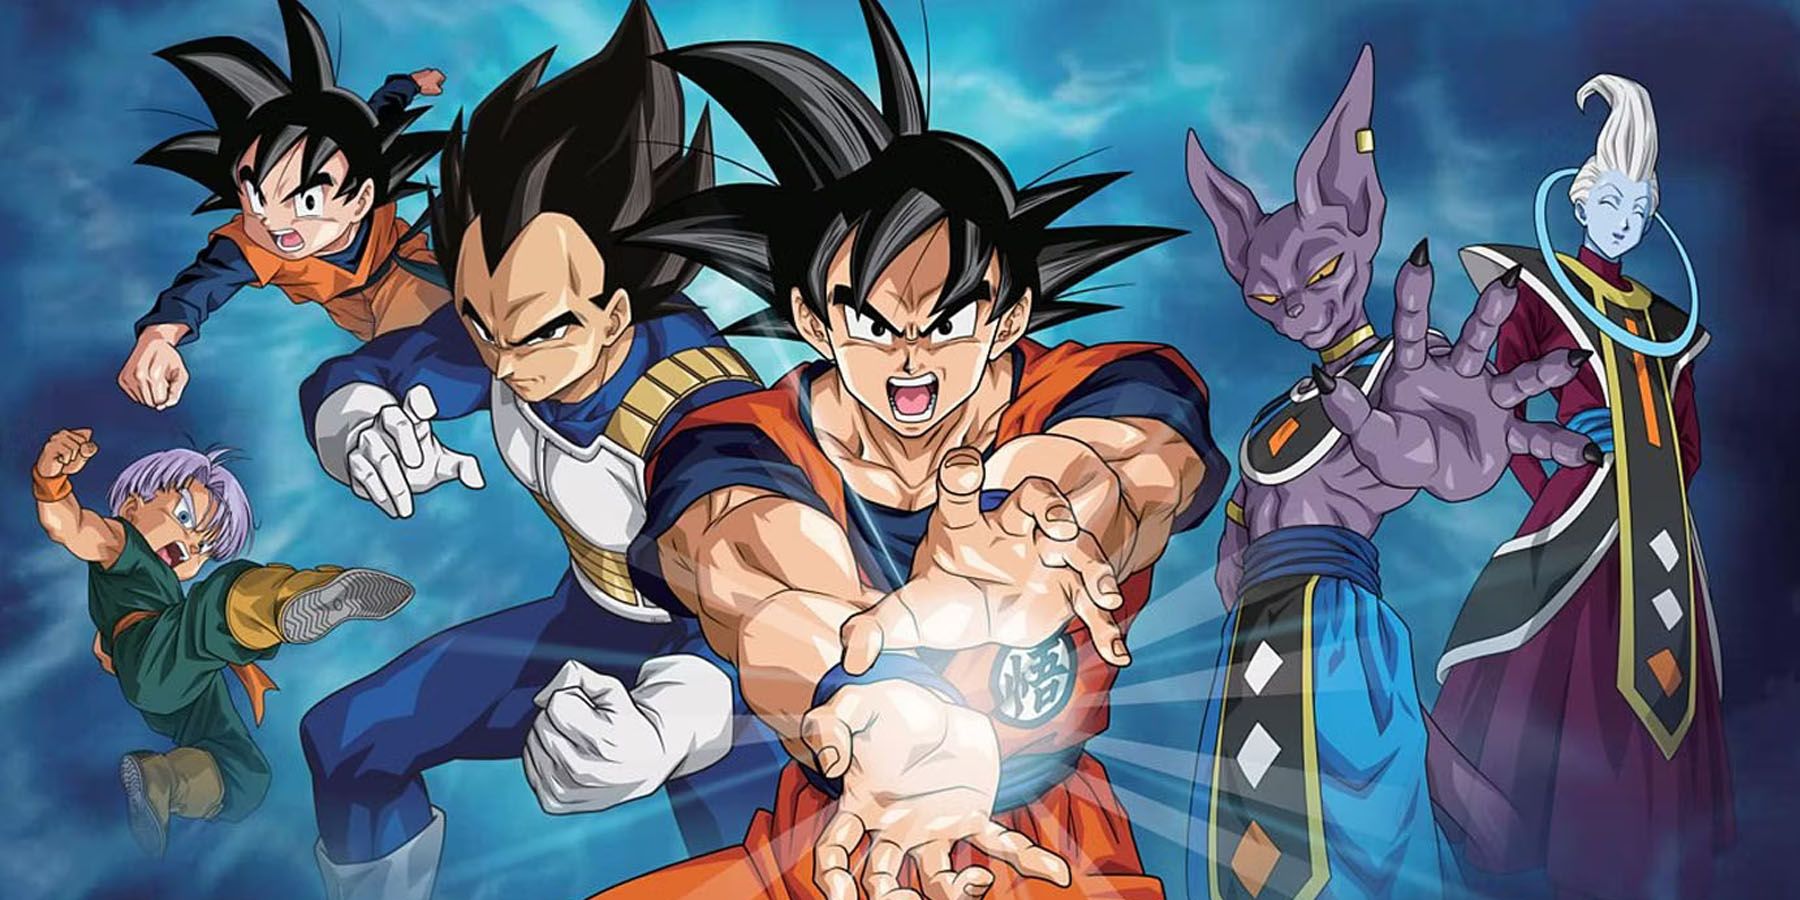 A promotional Dragon Ball Super image featuring Goku, Vegeta, Beerus, and other characters against a blue background.